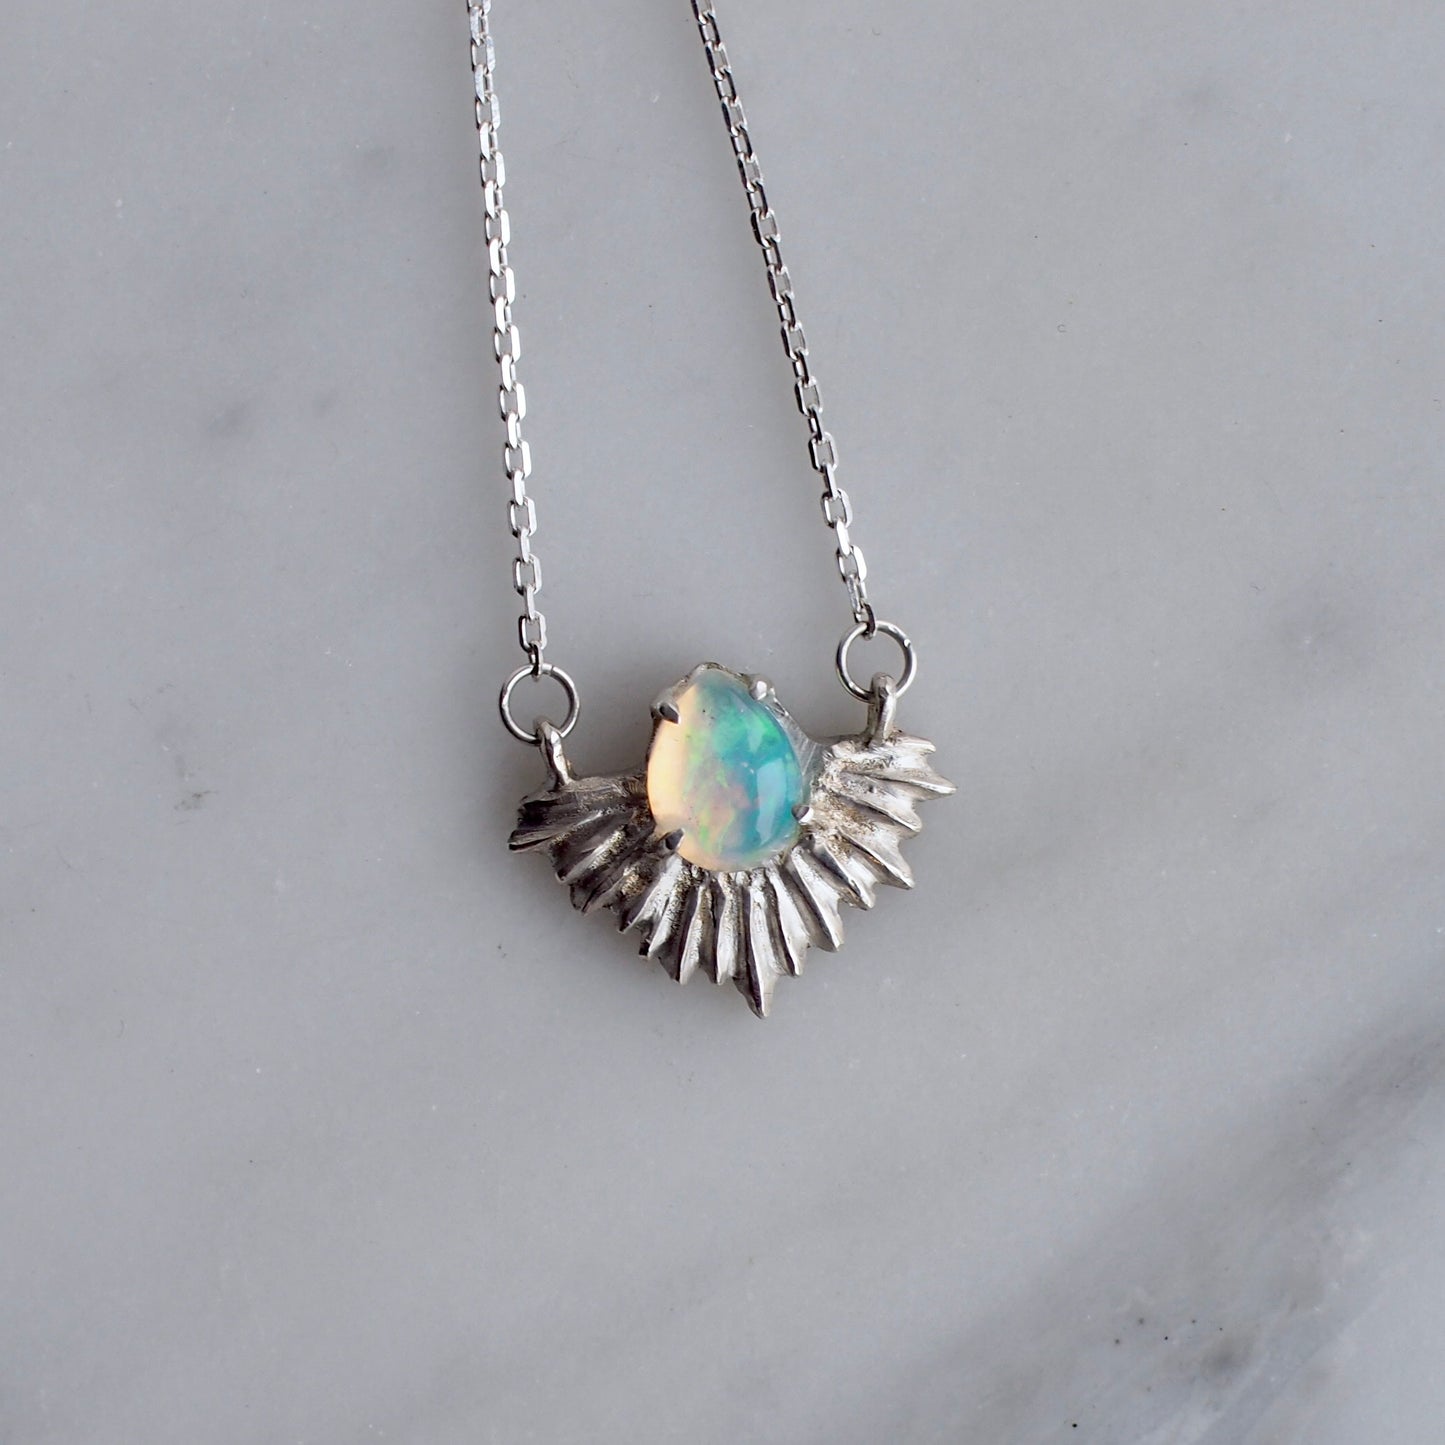 Silver Boundless Light Opal Necklace - Last One!